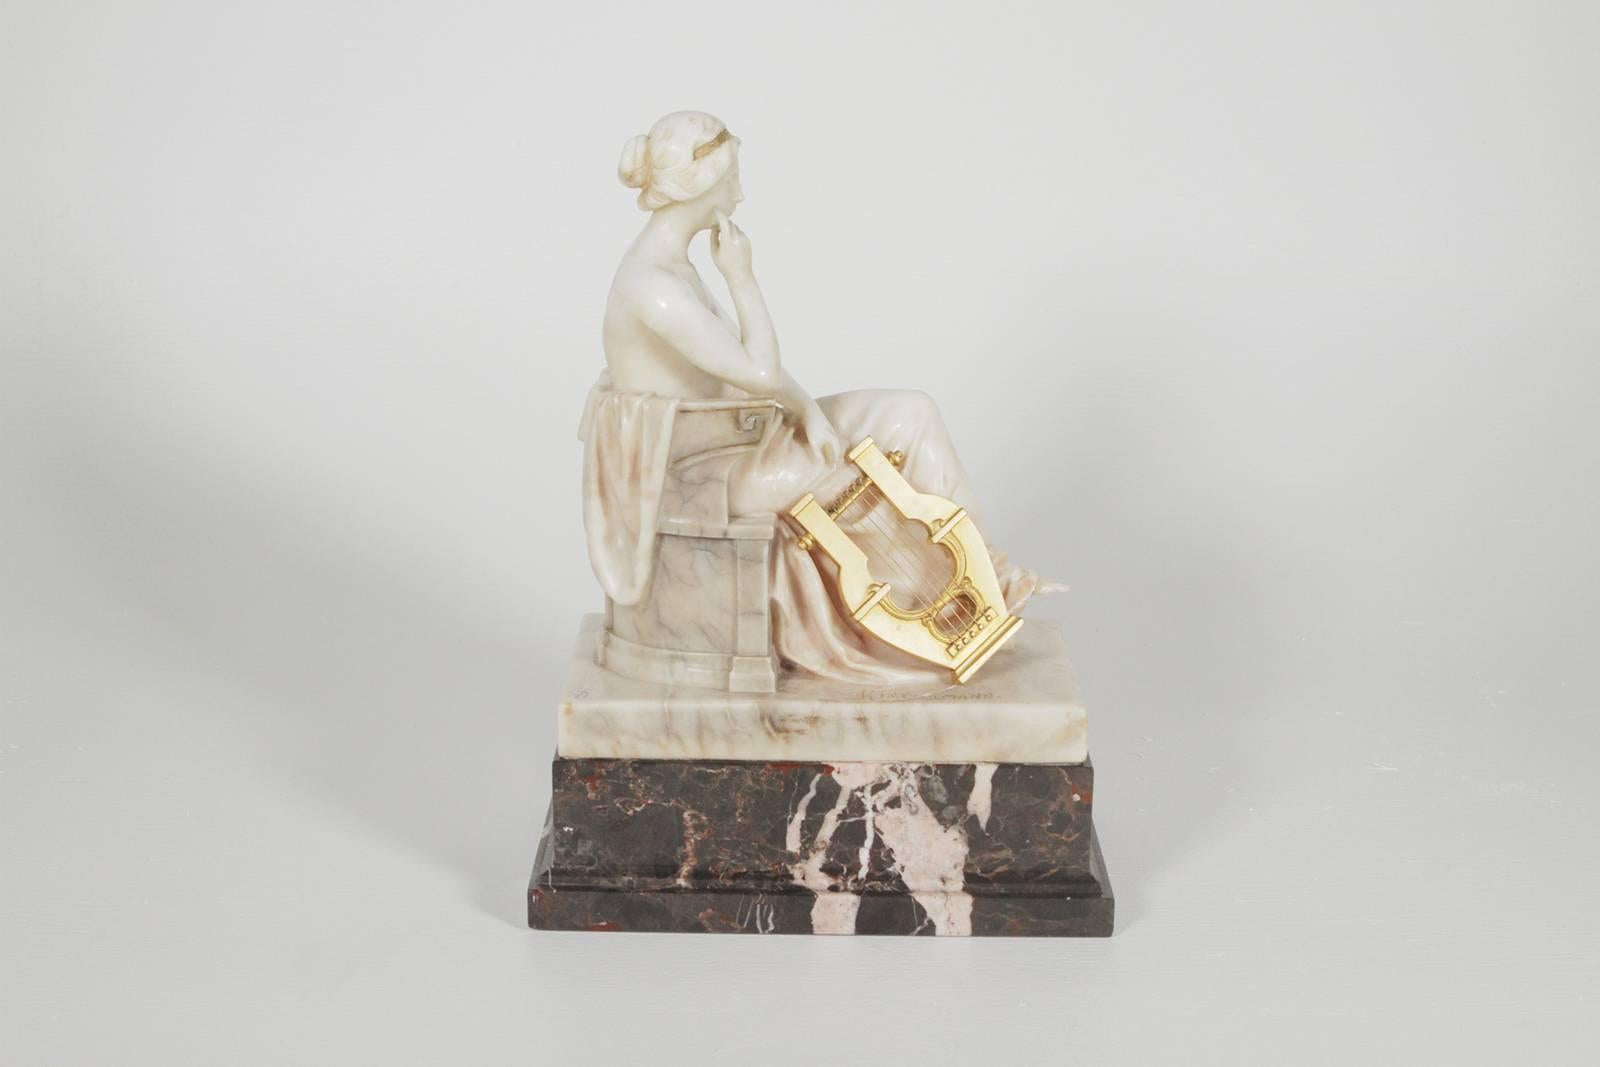 German marble and ormolu sculpture of a seated muse with harp signed Hintzelman-WithGladenbeck-Berlin Seal Germany, circa 1910-1925 The gorgeous carved sculpture in Carrara marble resting on a black marble base with a gilt bronze harp. Measures: